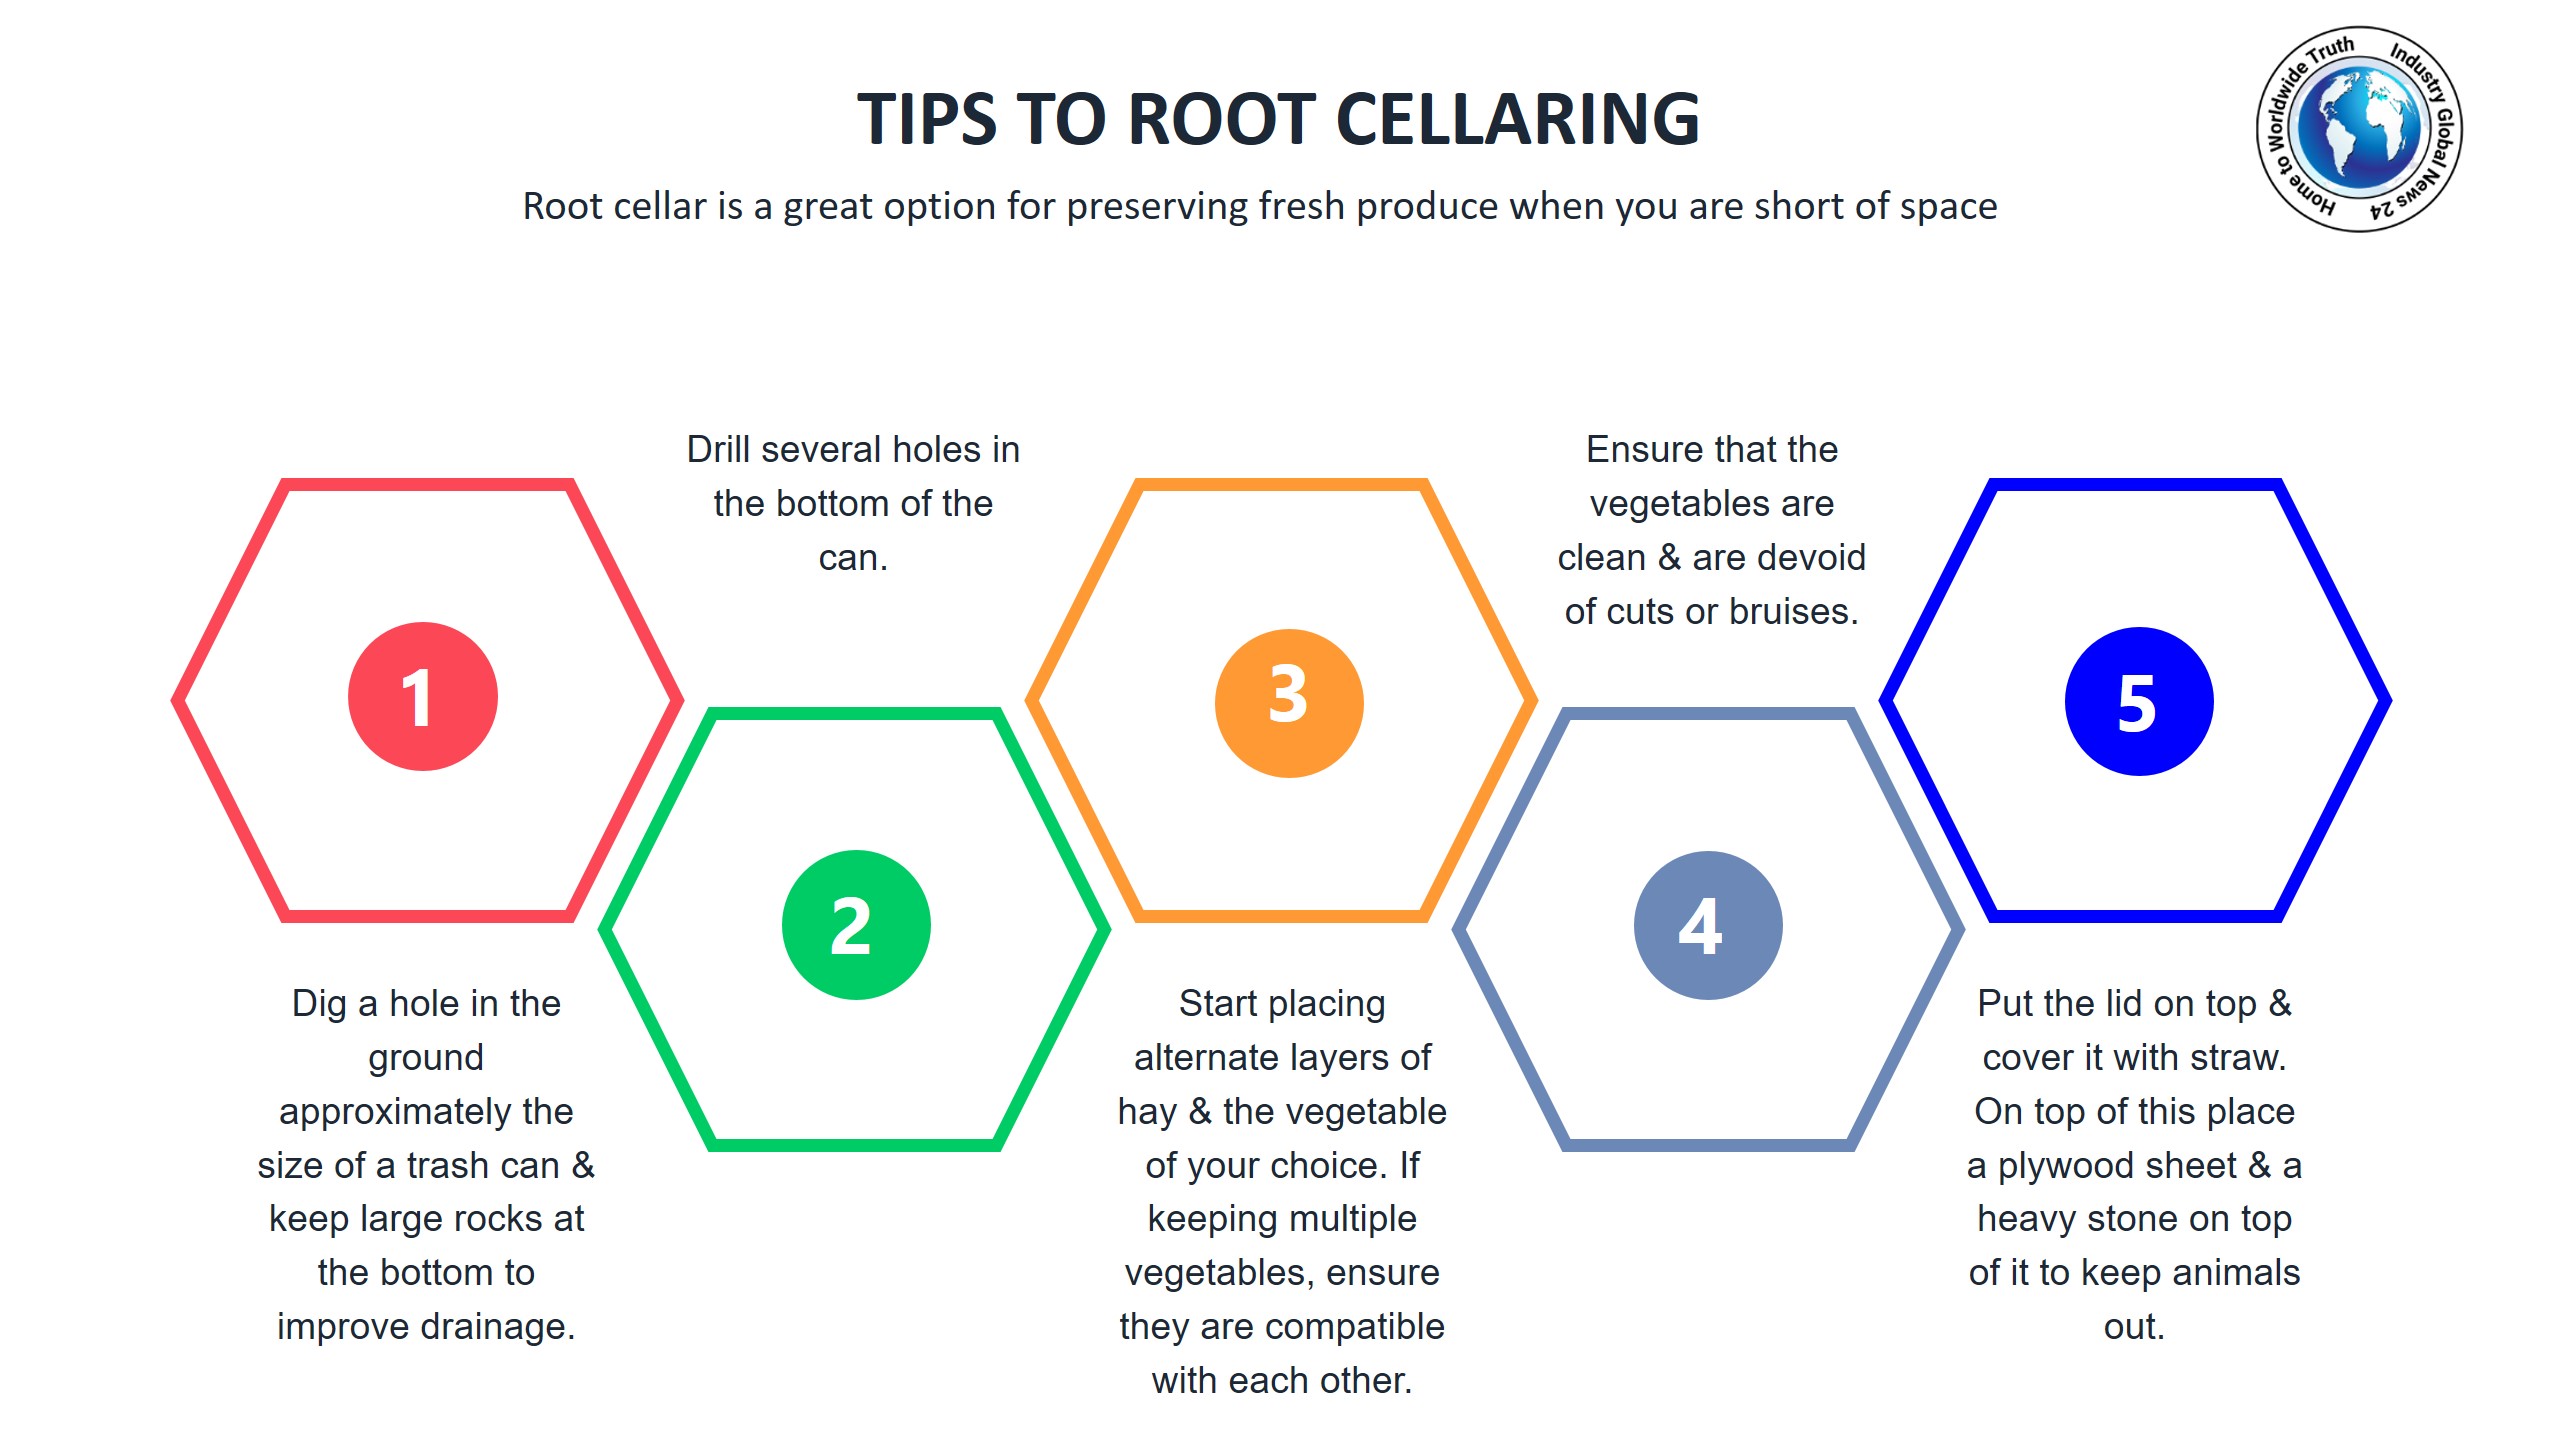 Tips to root cellaring